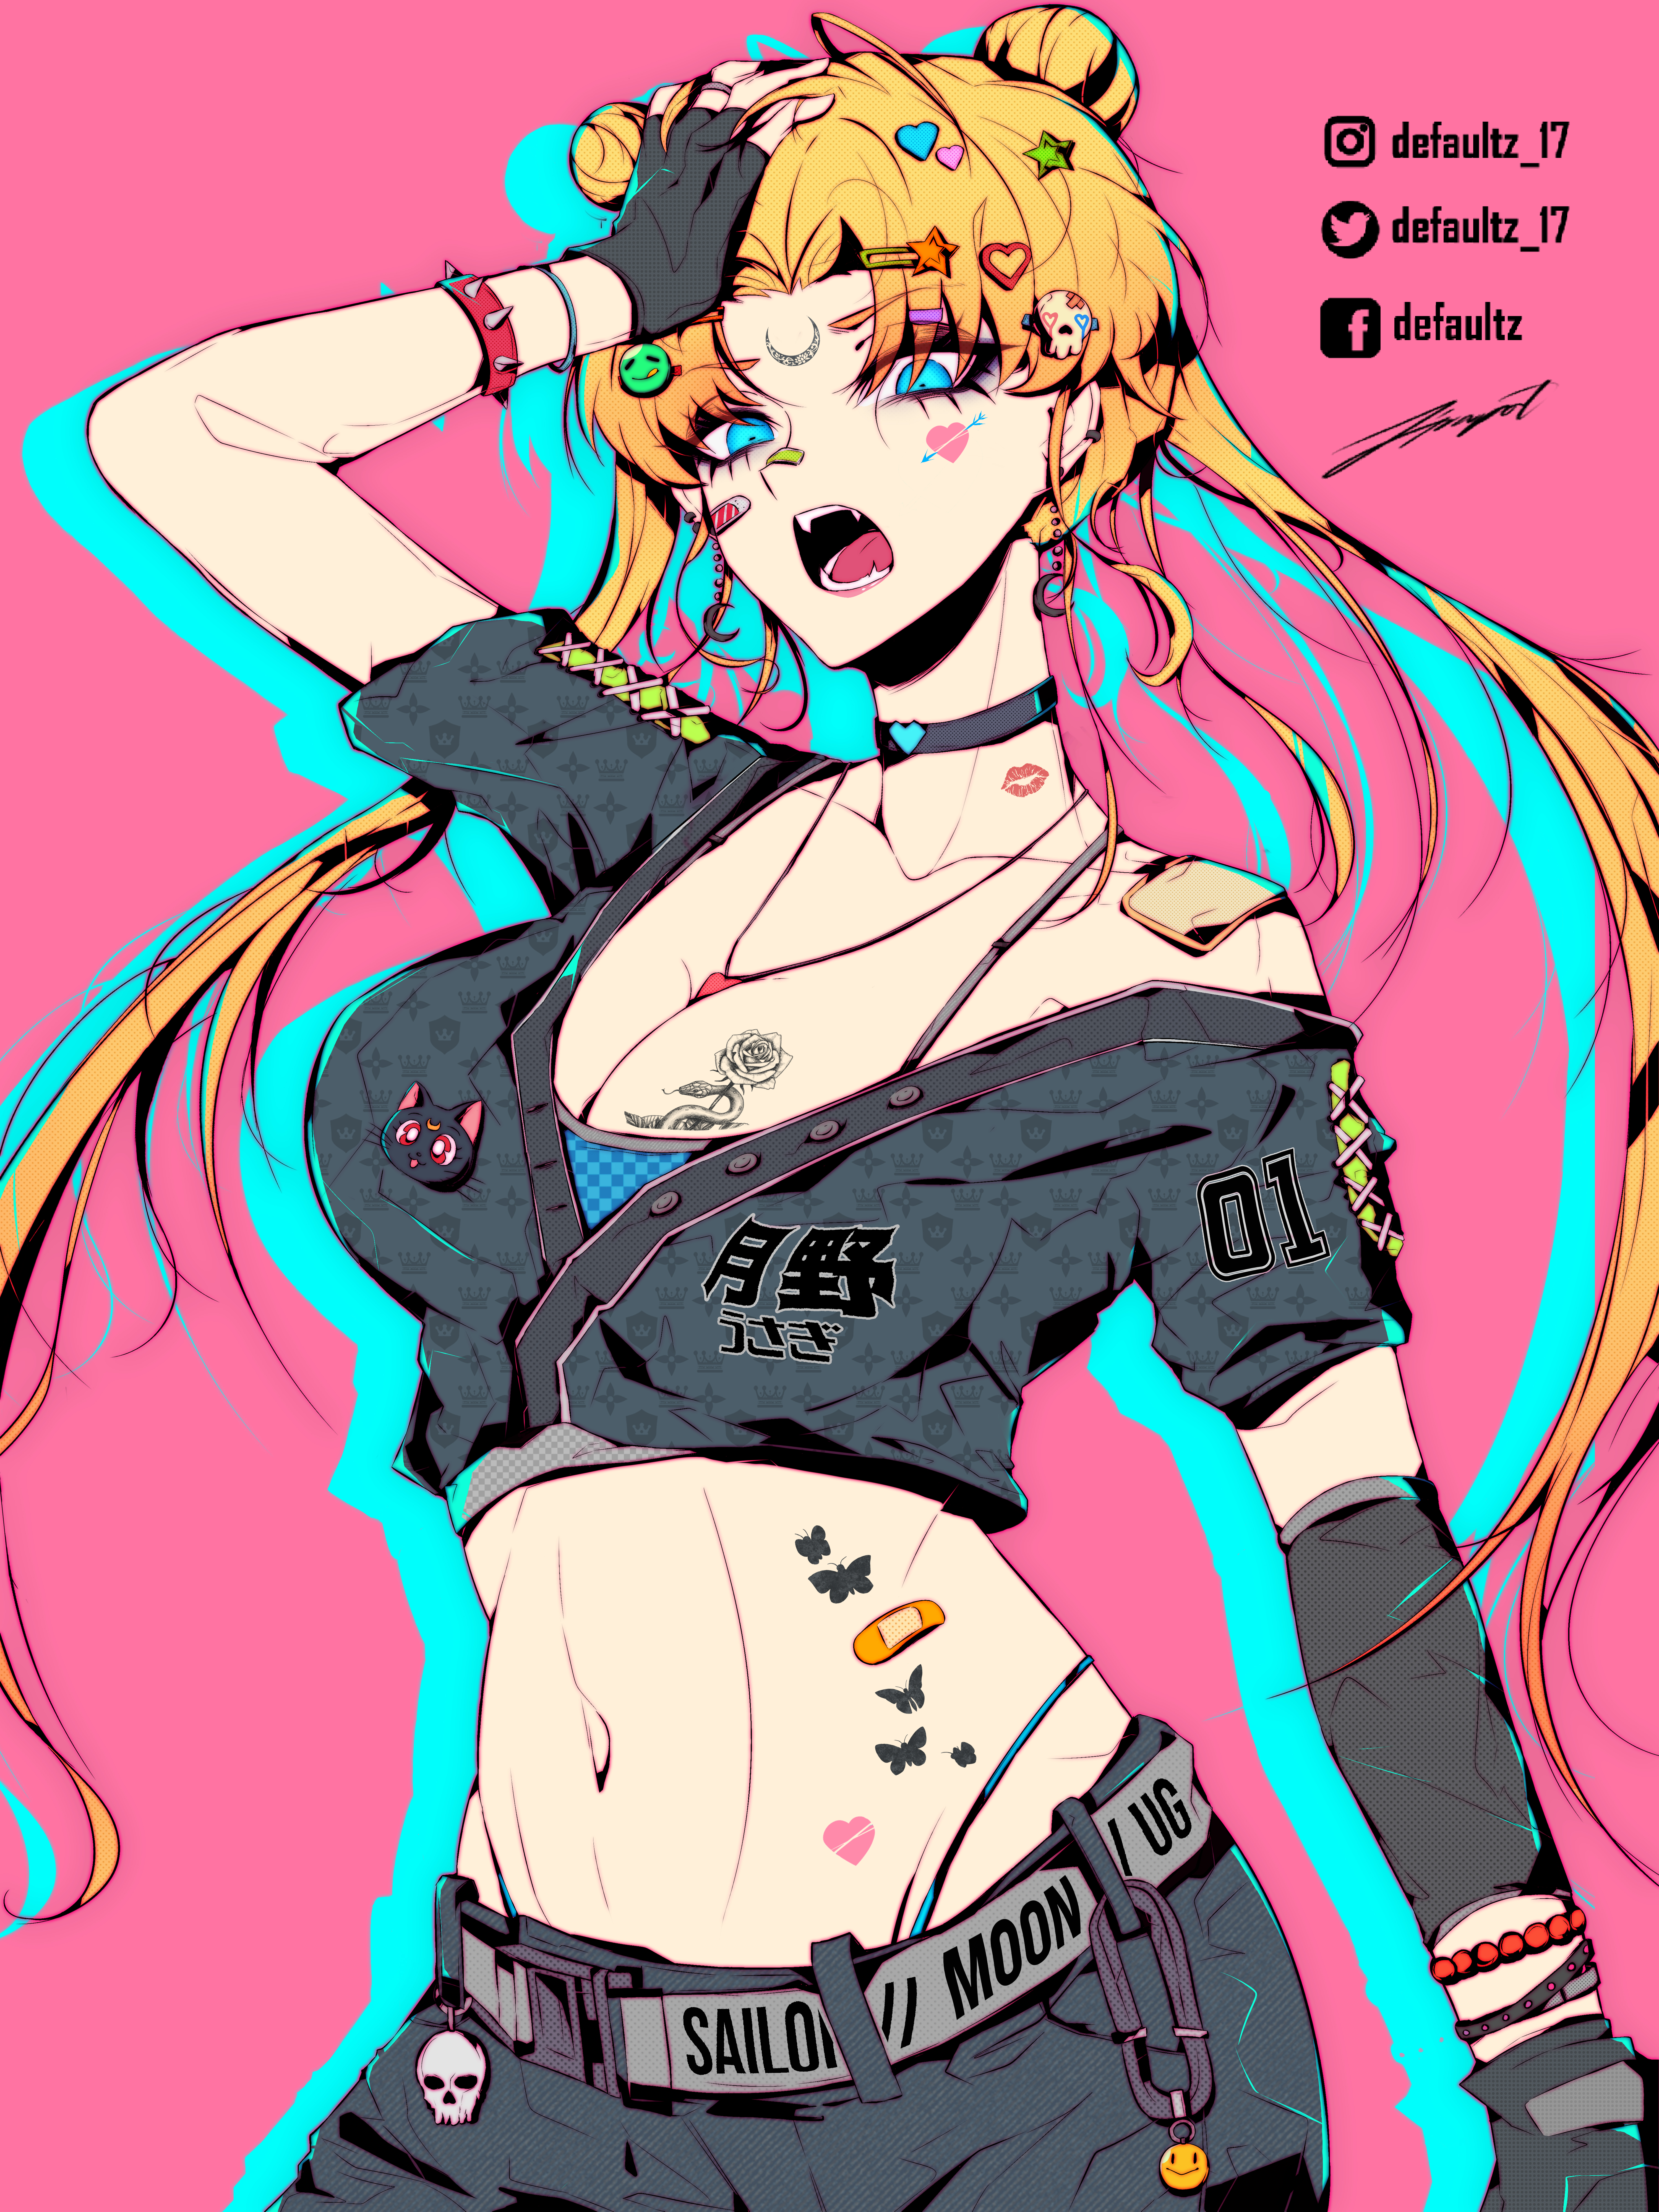 Anime 6000x8000 Defaultz_17 anime anime girls long hair blonde boobs colorful Japanese characters Japanese portrait display twintails choker necklace belly band-aid gloves fingerless gloves